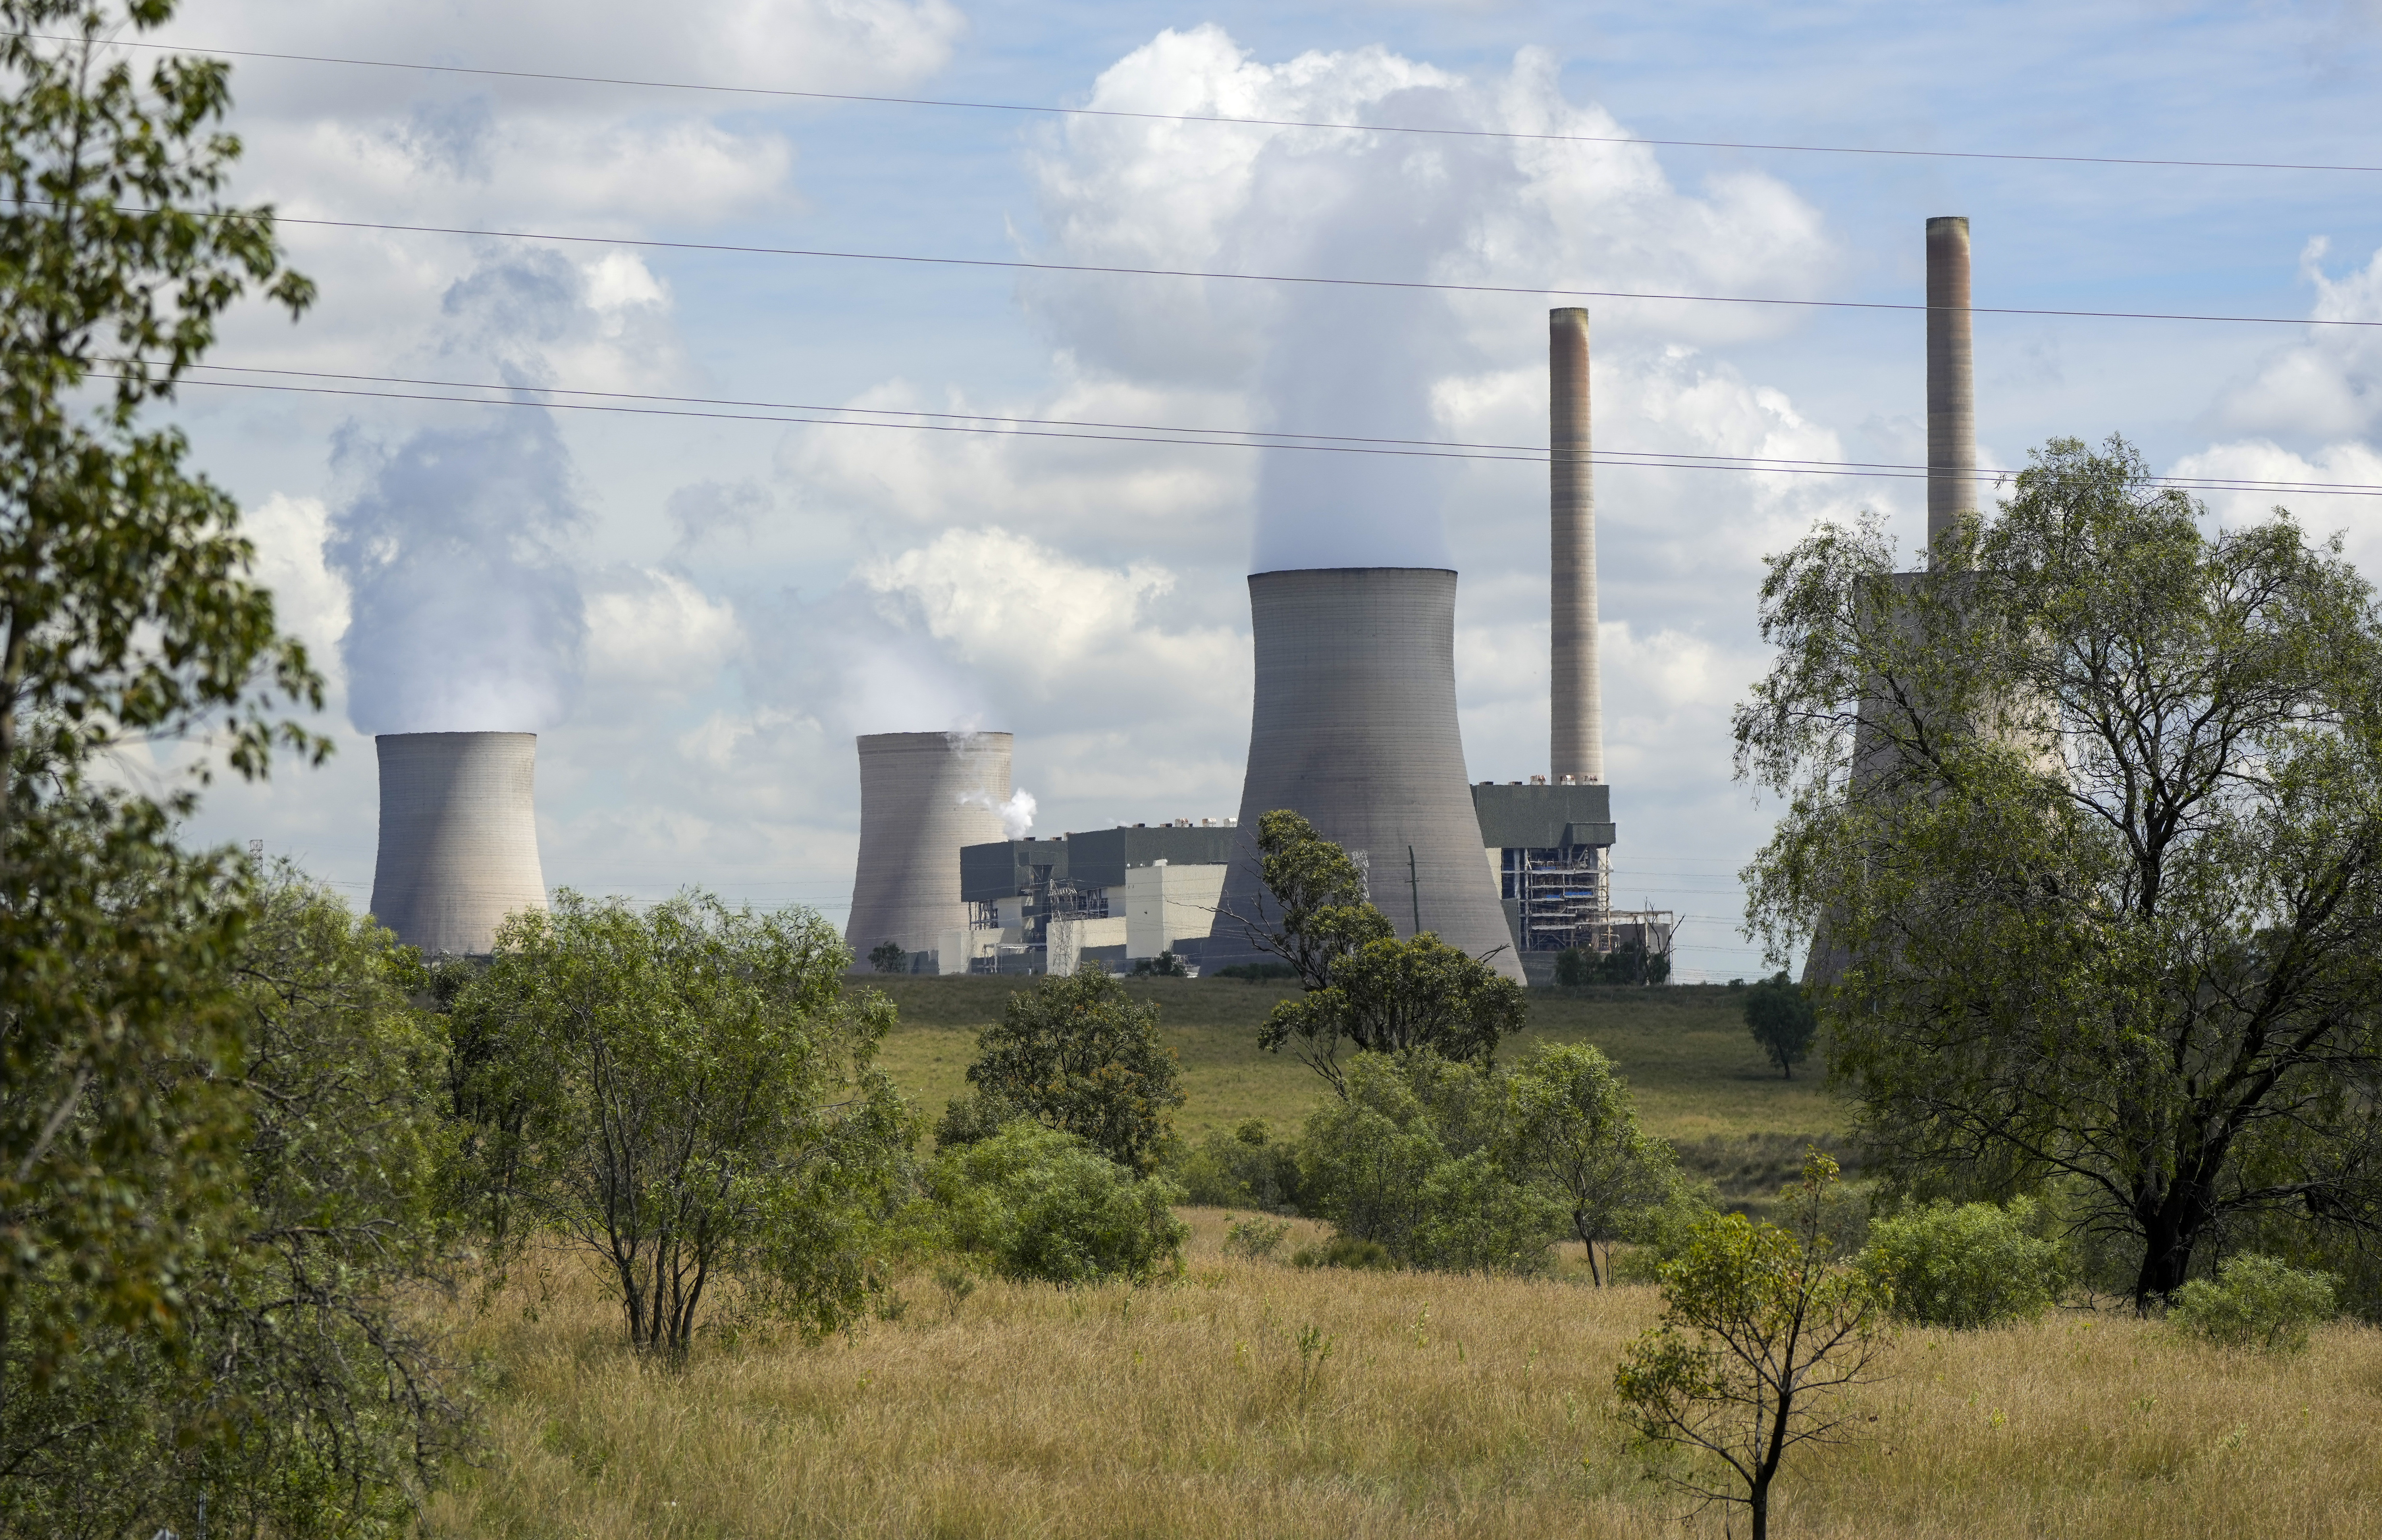 The Bayswater Power Station, a coal-powered thermal power station near Muswellbrook in the Hunter Valley, Australia, Tuesday, Nov. 2, 2021. Australias Prime Minister Scott Morrison has launched a billion Australian dollar ($738 million) investment fund to fast track emerging low emissions technologies including carbon capture and storage, Wednesday, Nov. 10, 2021. (AP Photo/Mark Baker)